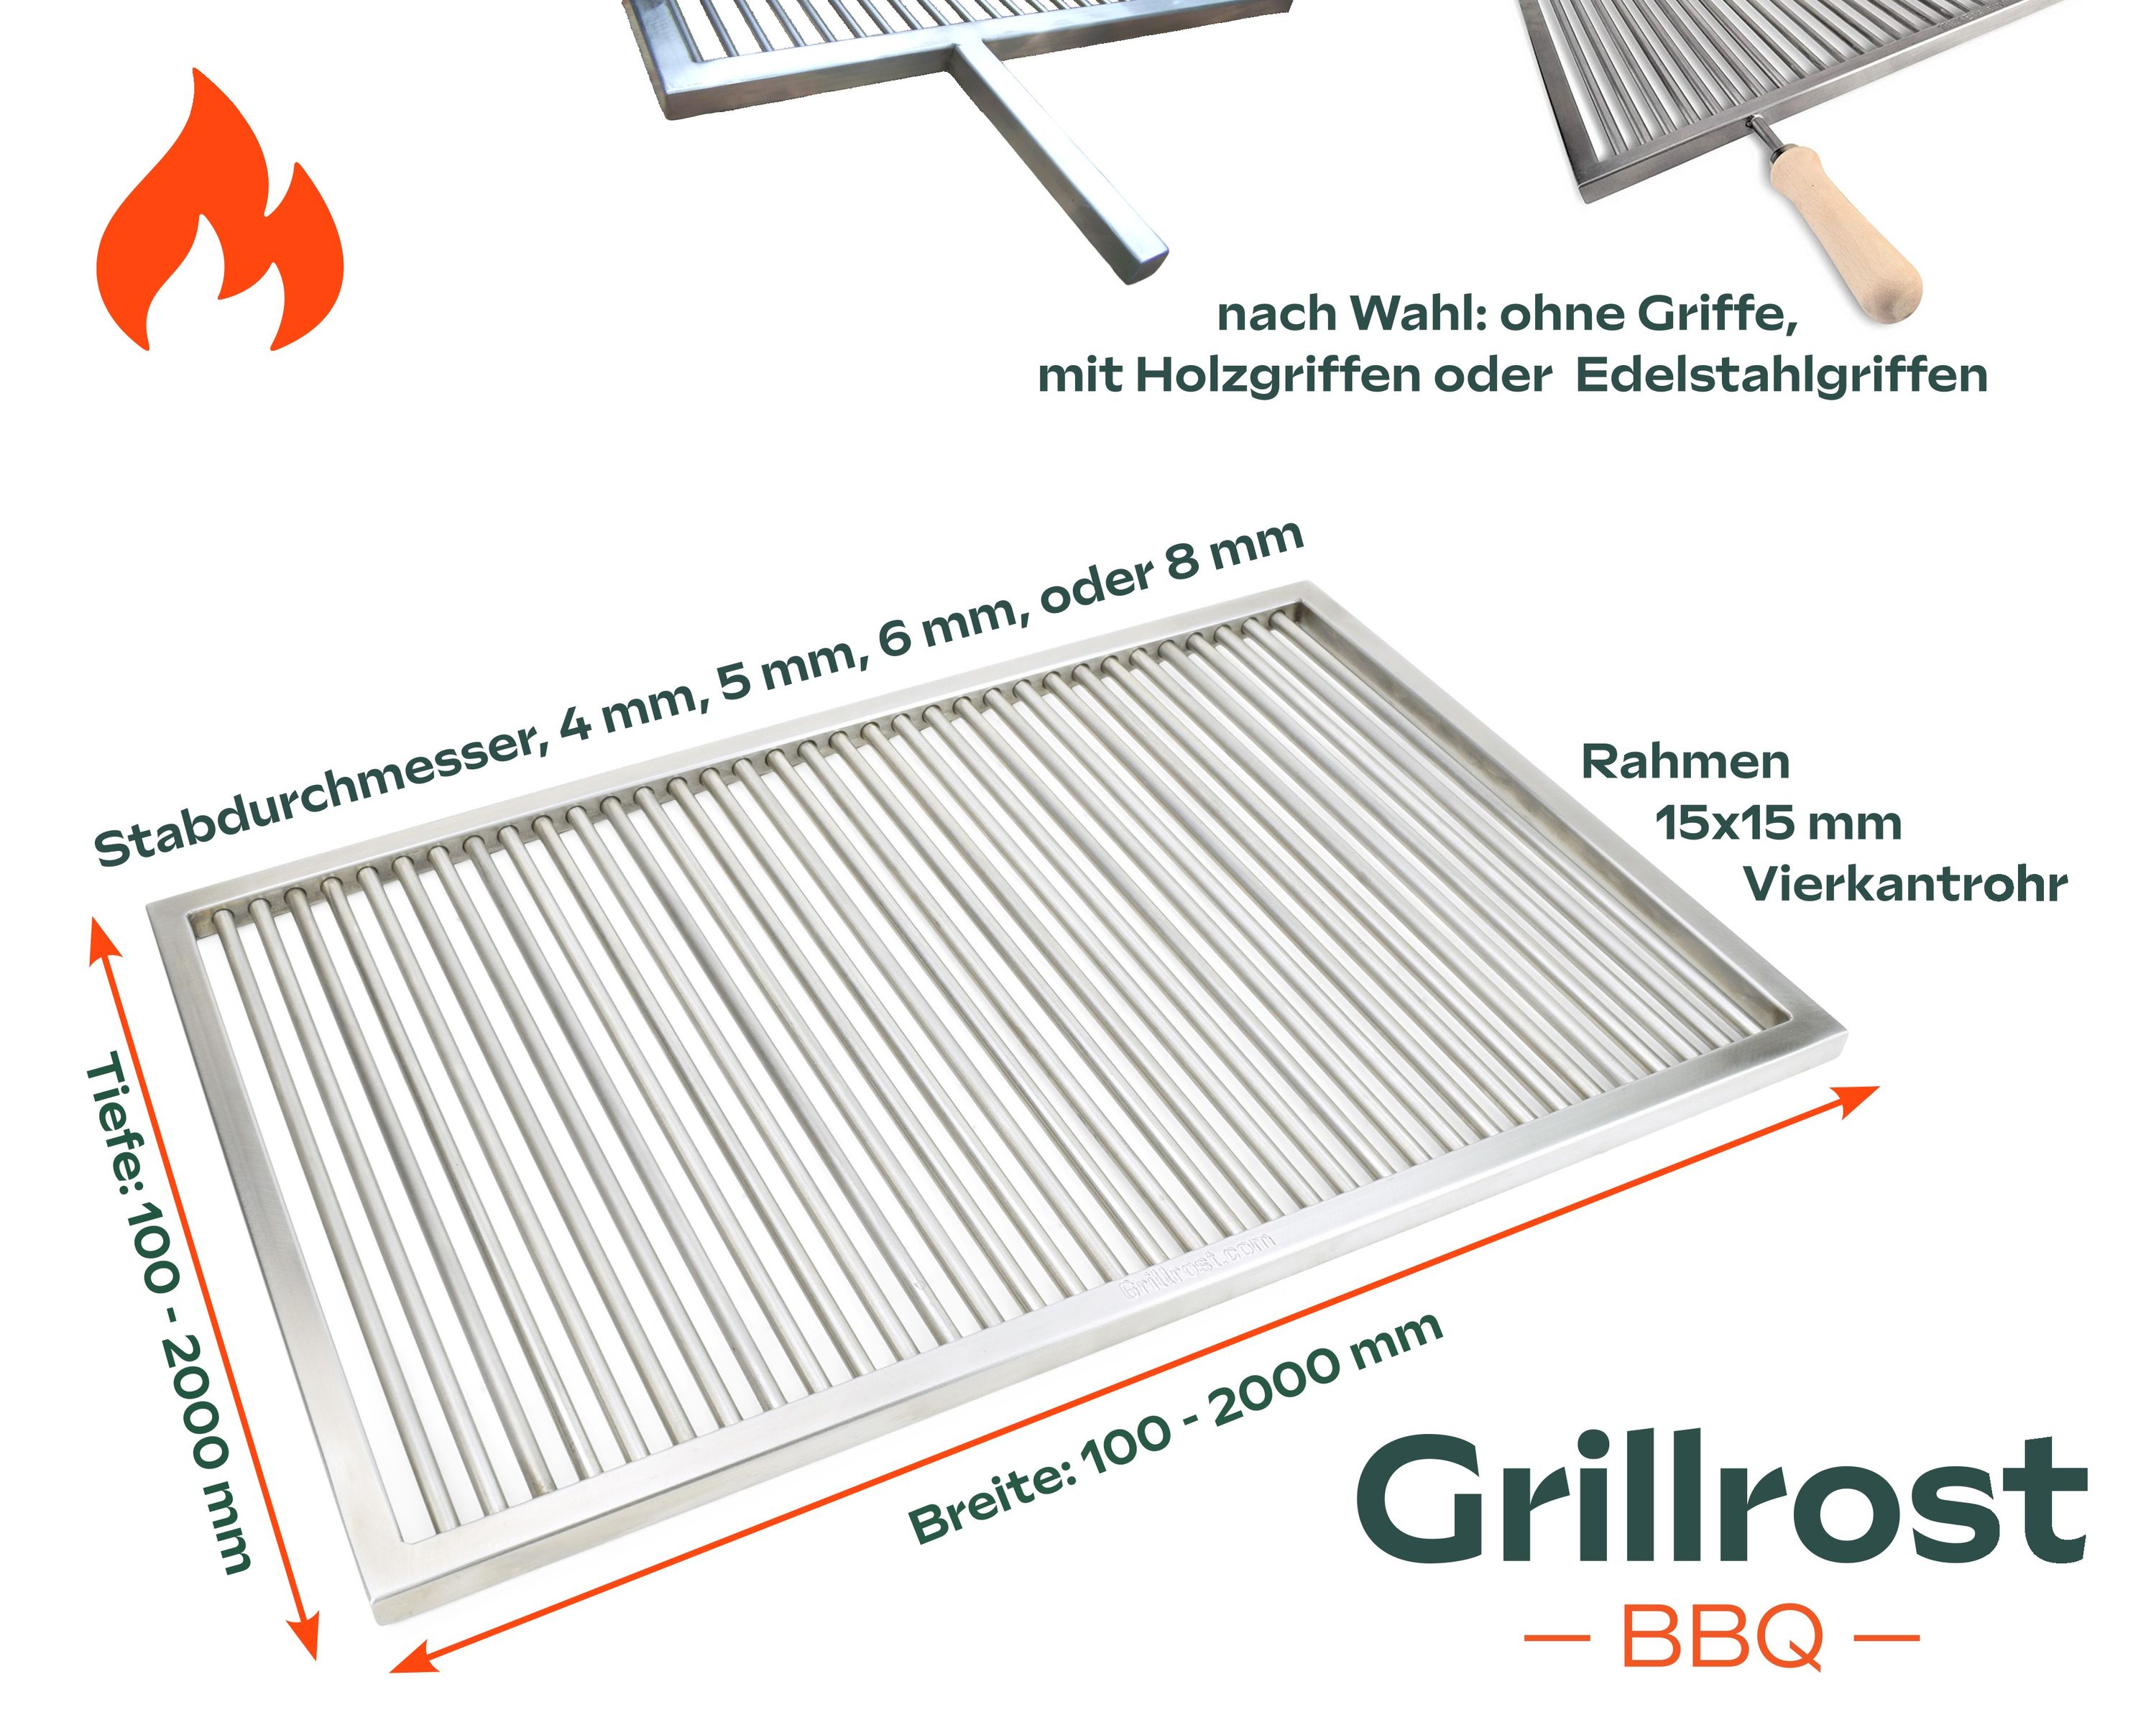 Barbecue grill made to measure ECKIG PREMIUM model in stainless steel